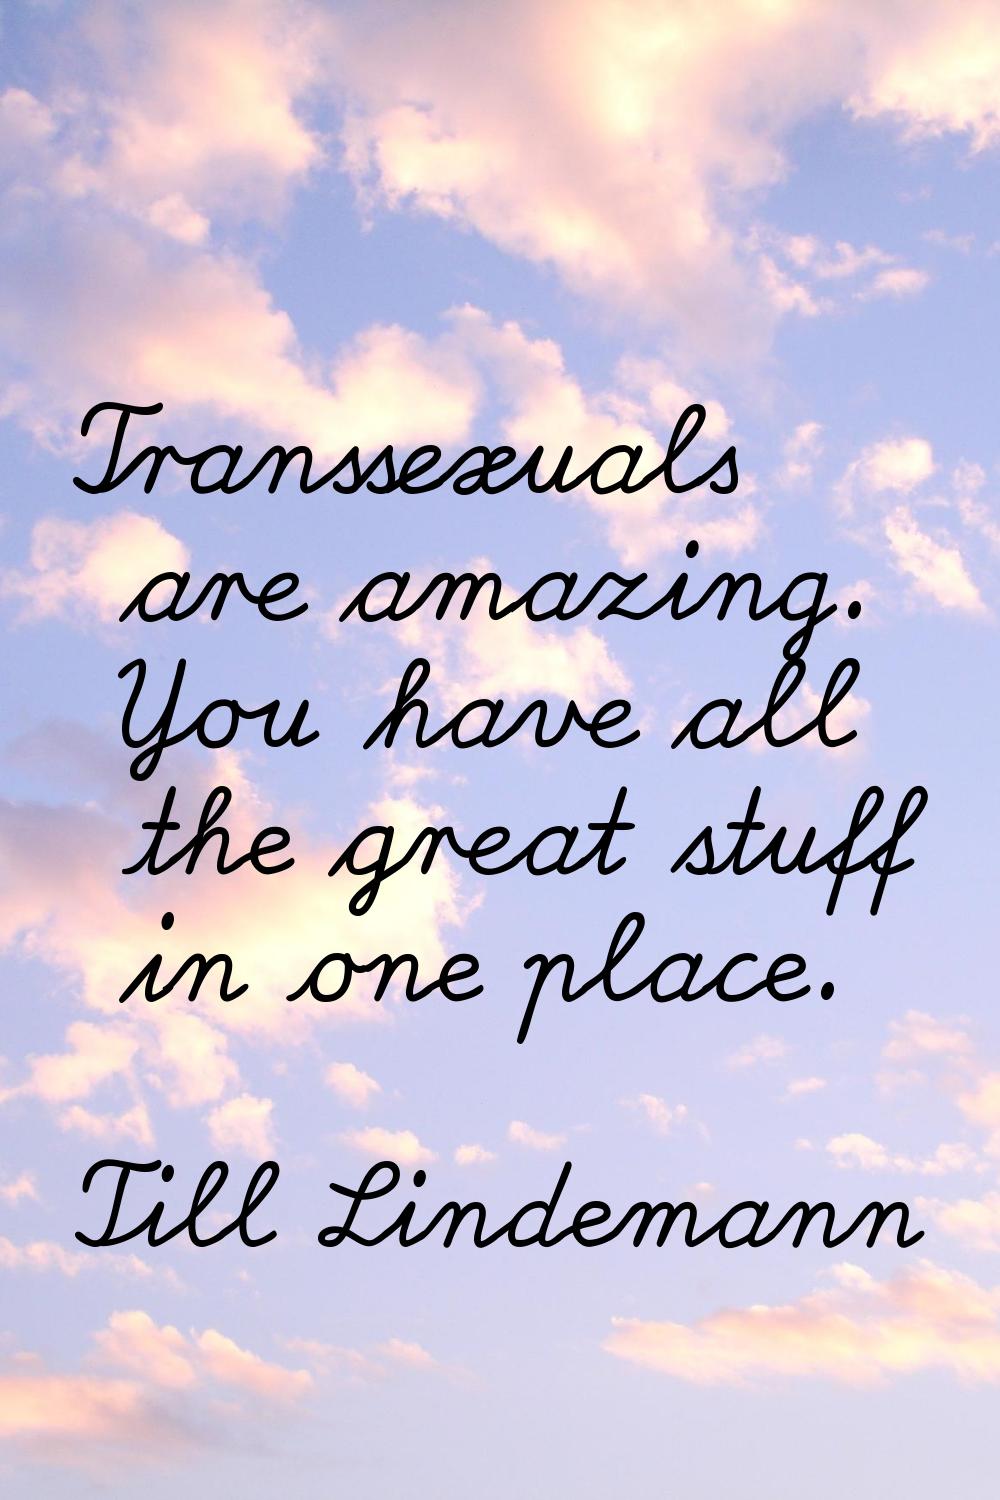 Transsexuals are amazing. You have all the great stuff in one place.